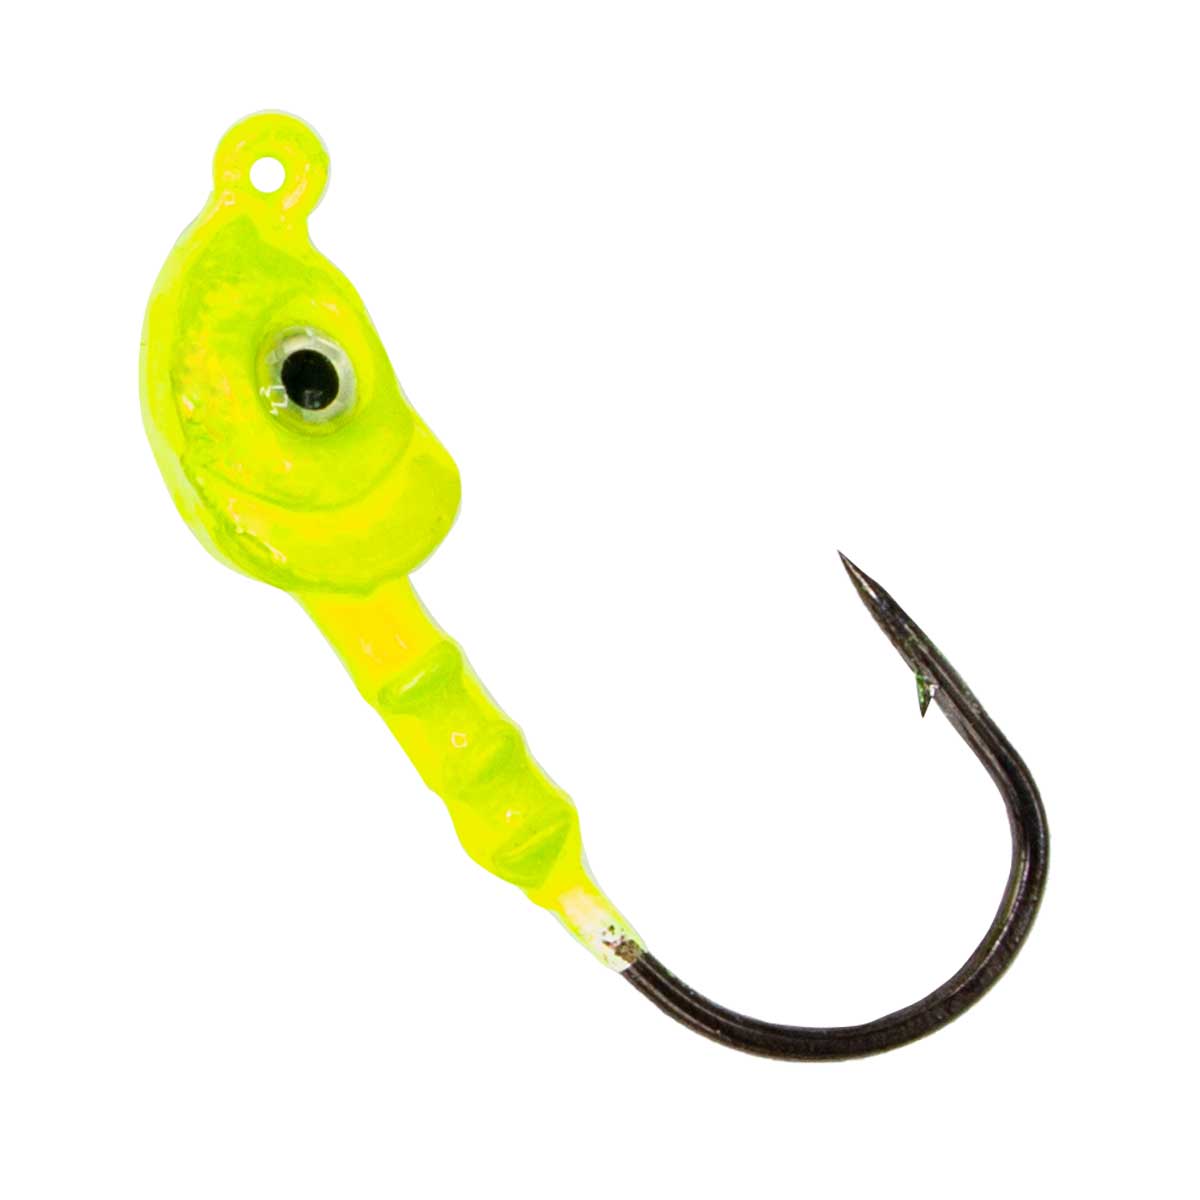 Saltwater Jigheads– H&H Lure Company